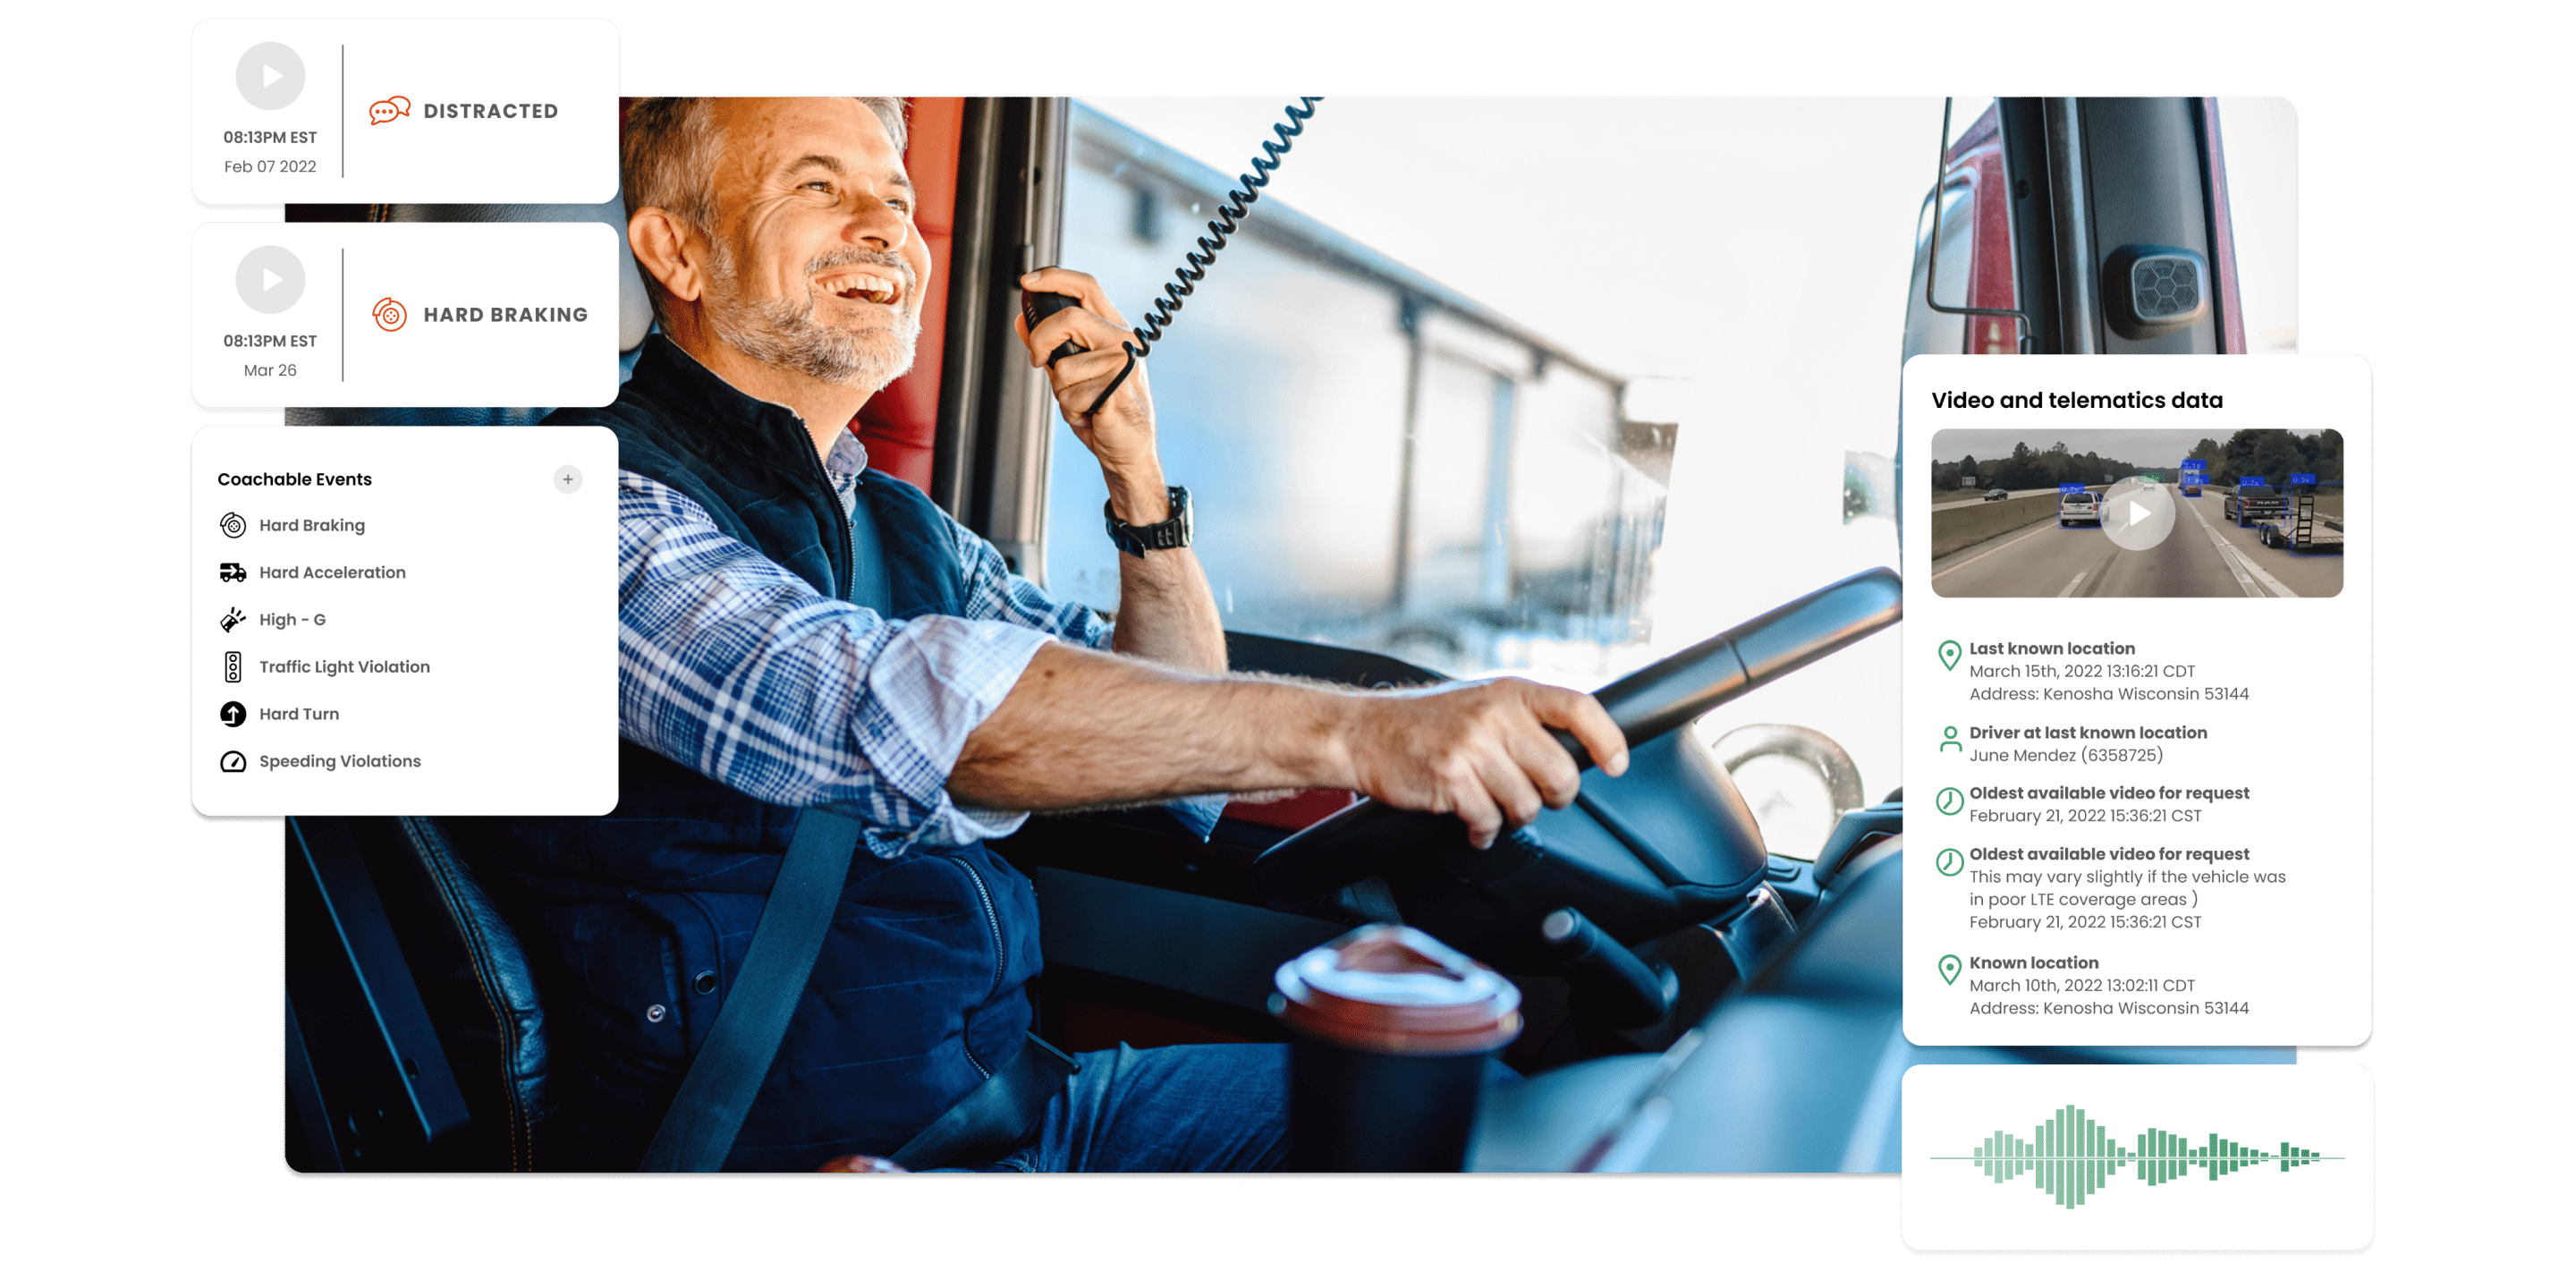 Middle aged white man laughing while talking into intercom system inside a commercial semi truck